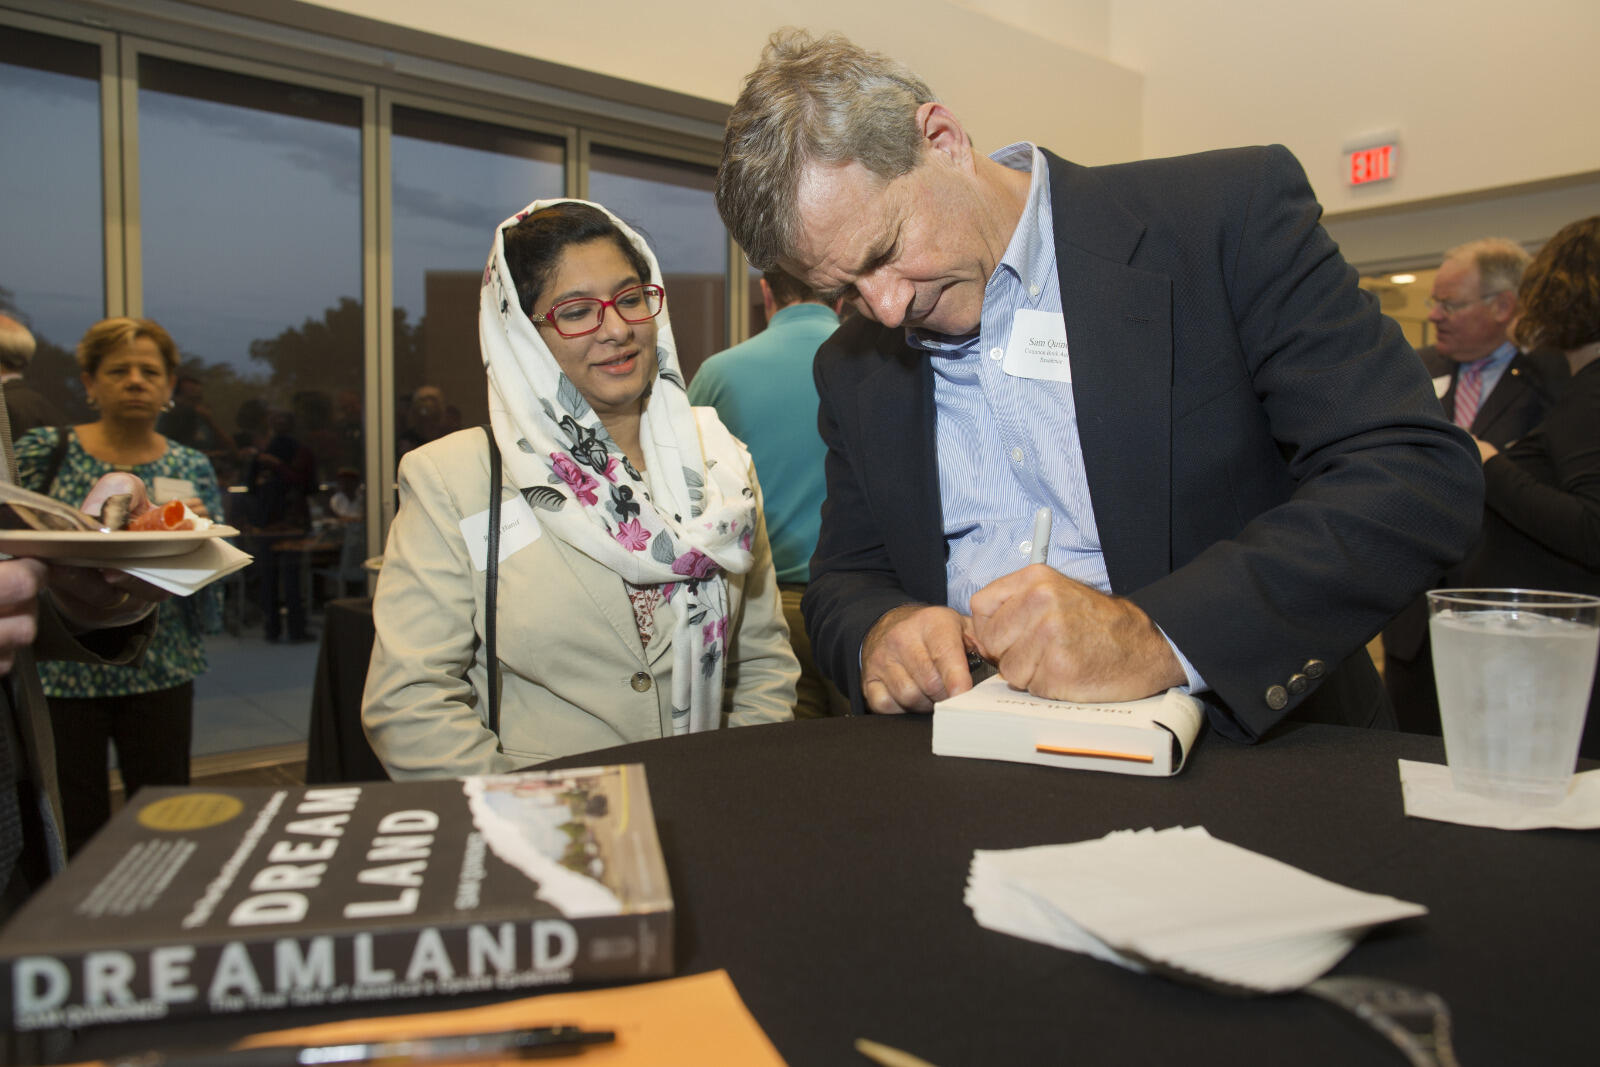 Following his lecture, Quinones signed copies of "Dreamland" and spoke with many of the students, faculty, staff and community members who attended the event.
